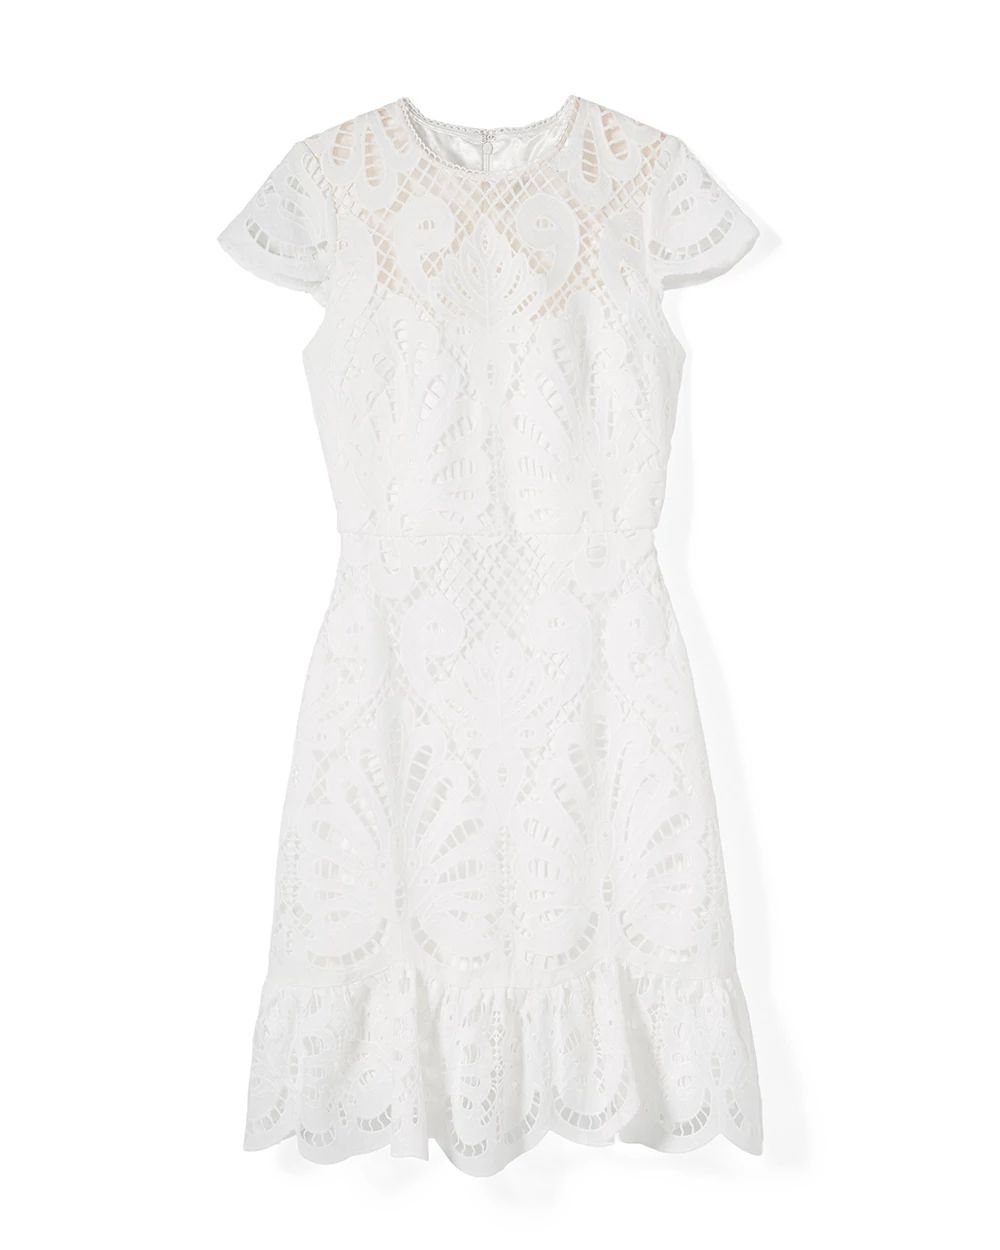 Petite White Cap Sleeve Lace Dress click to view larger image.